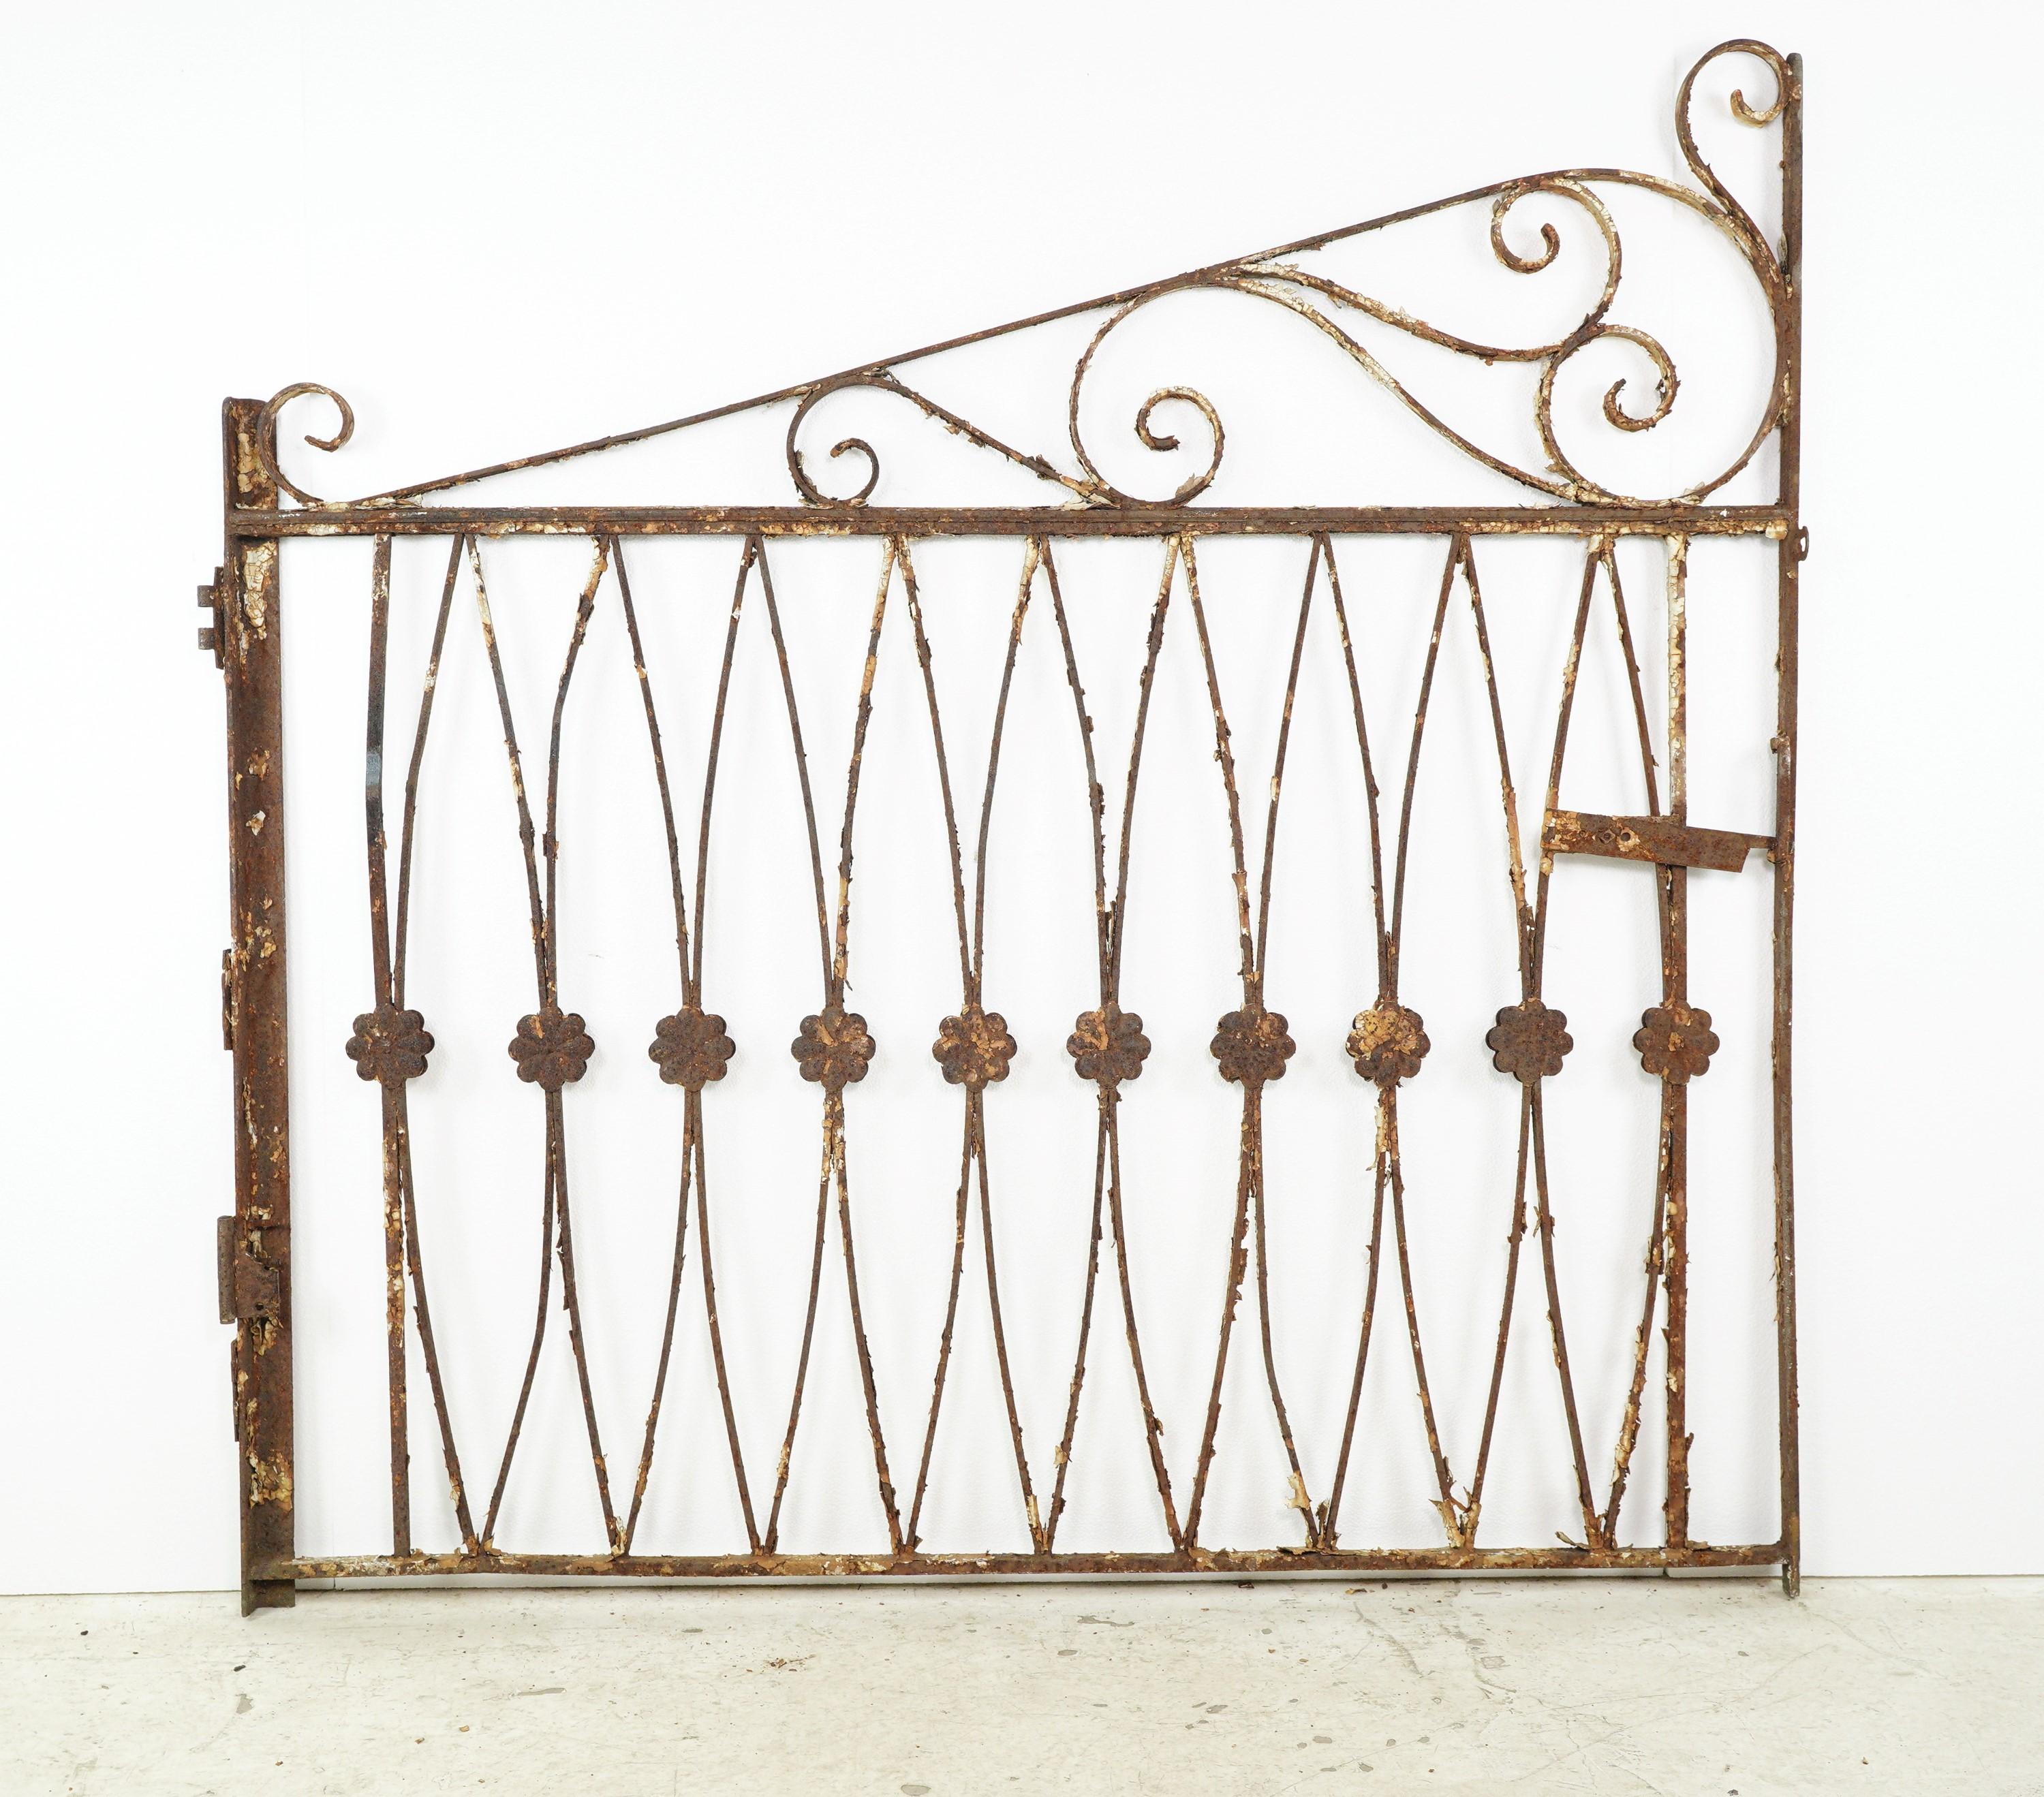 111 in. Ovals & Swirls Wrought Iron Double Driveway Gates For Sale 1